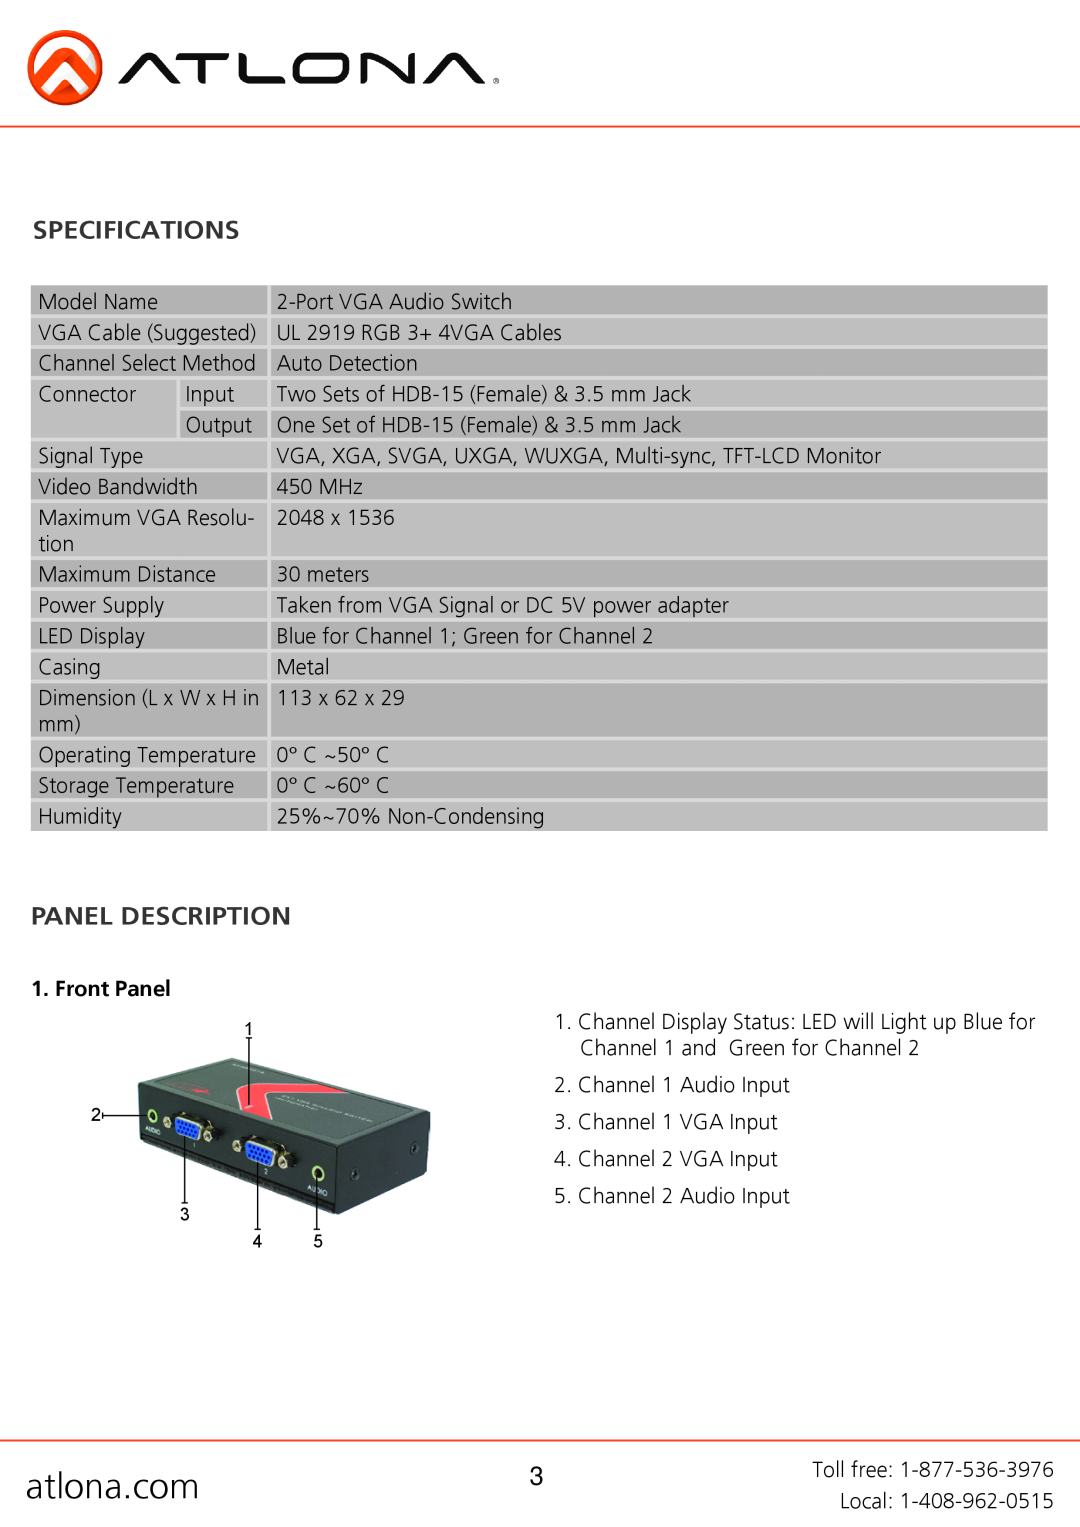 Atlona AT-APC21A user manual Specifications, Panel Description, Front Panel 